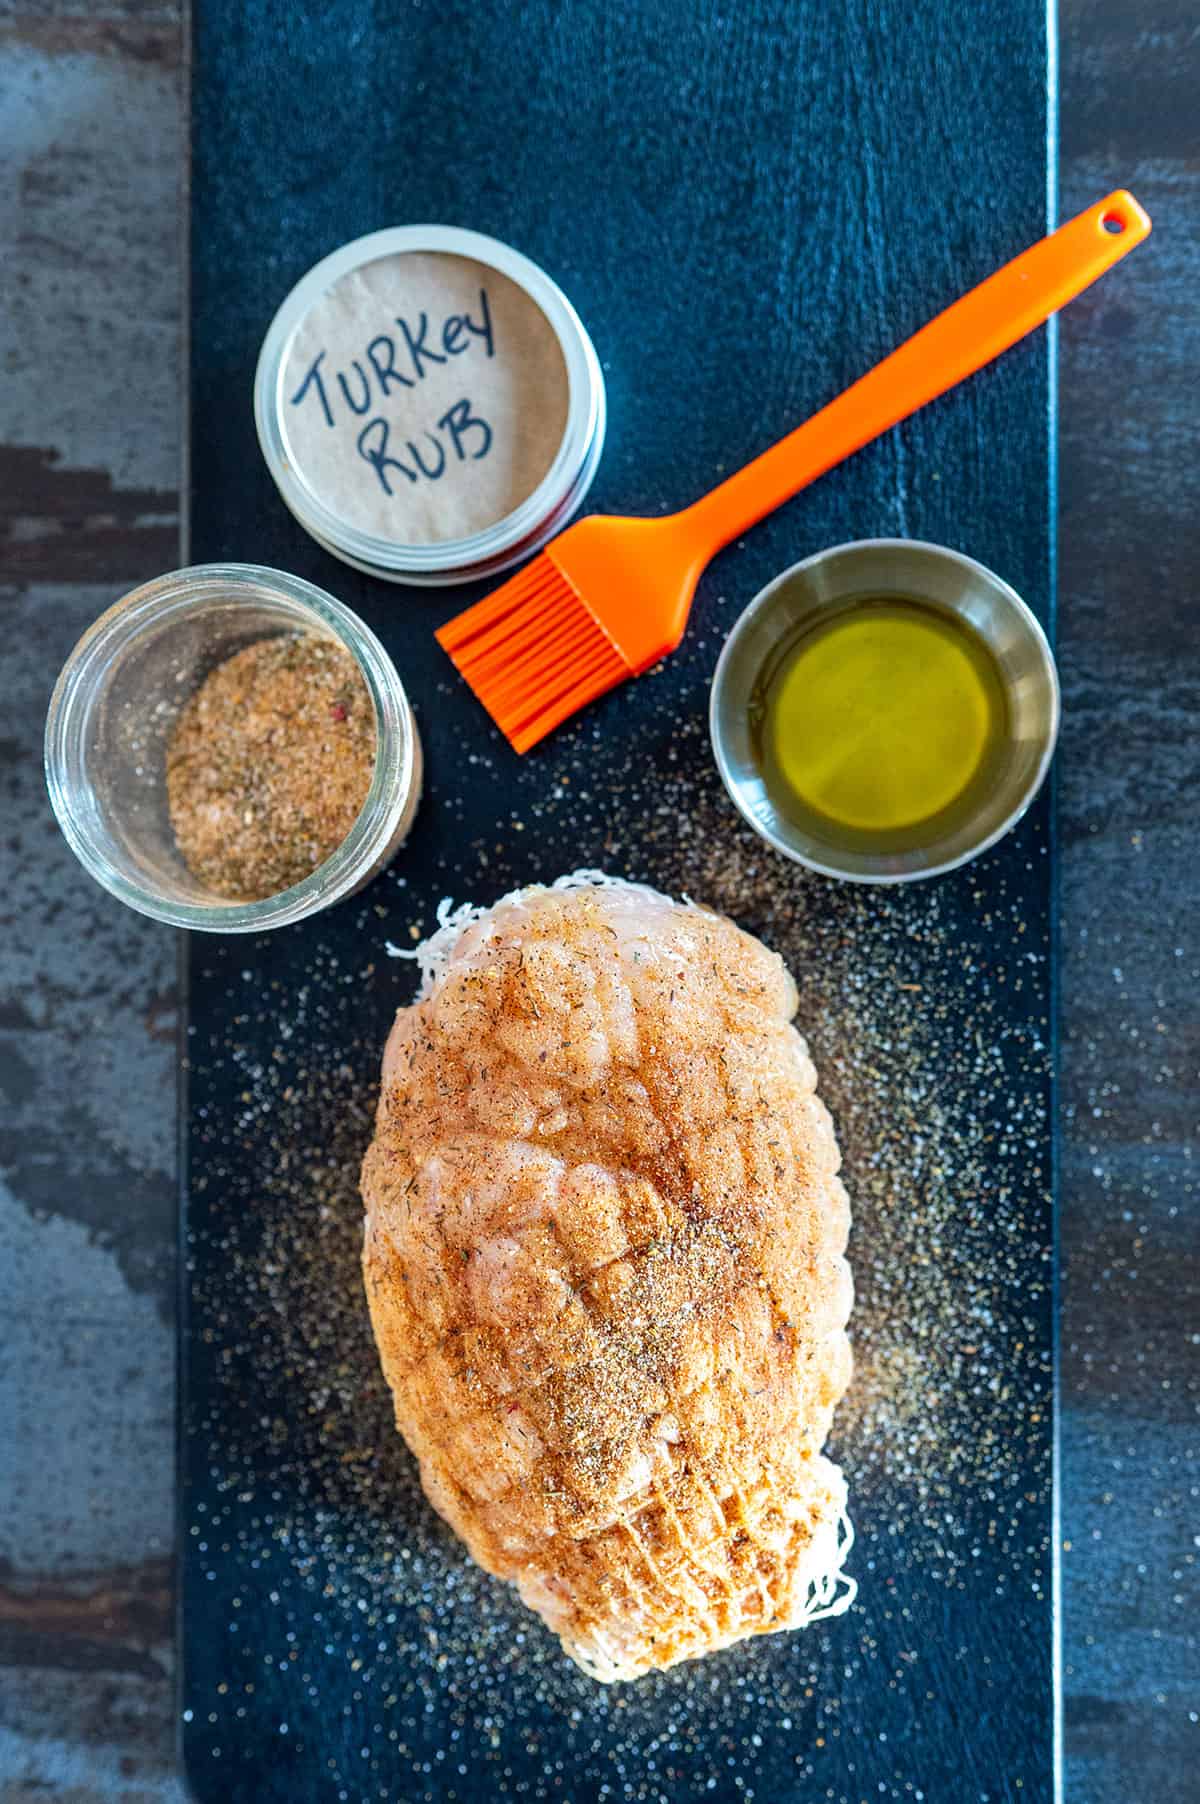 Turkey breast roast brushed with oil and seasoned with rub.